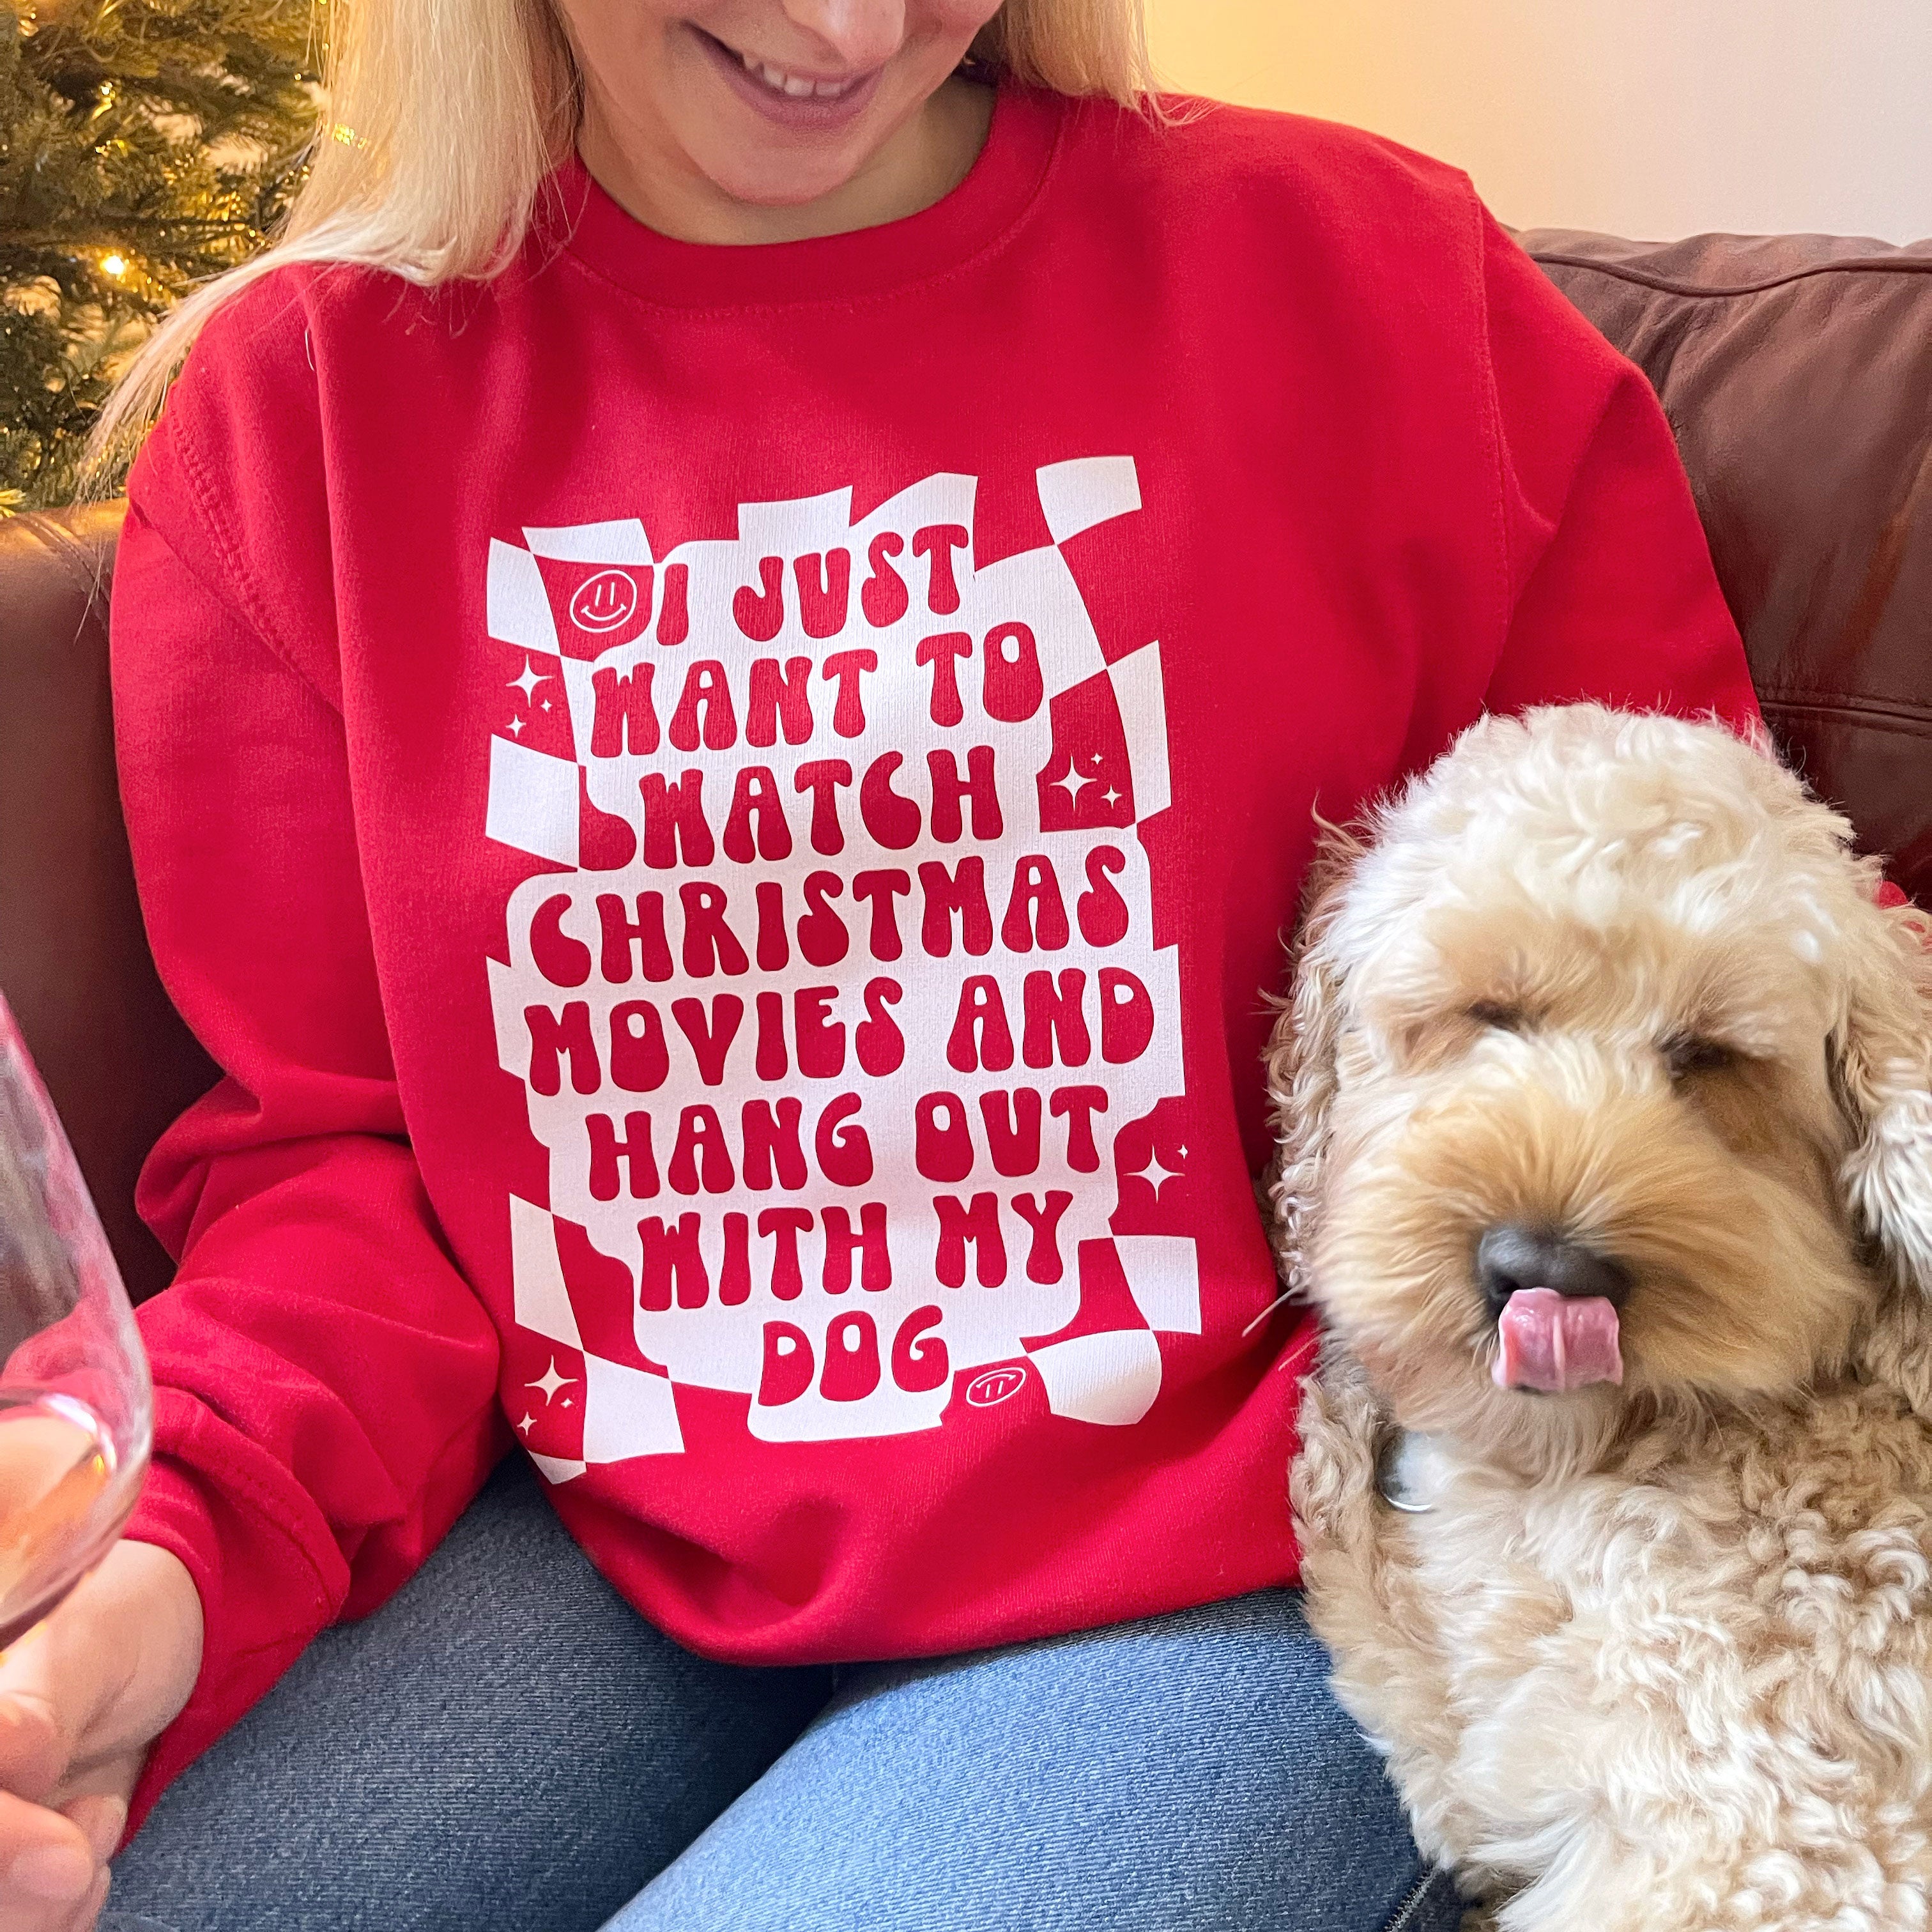 Hang Out With My Dog Christmas Jumper